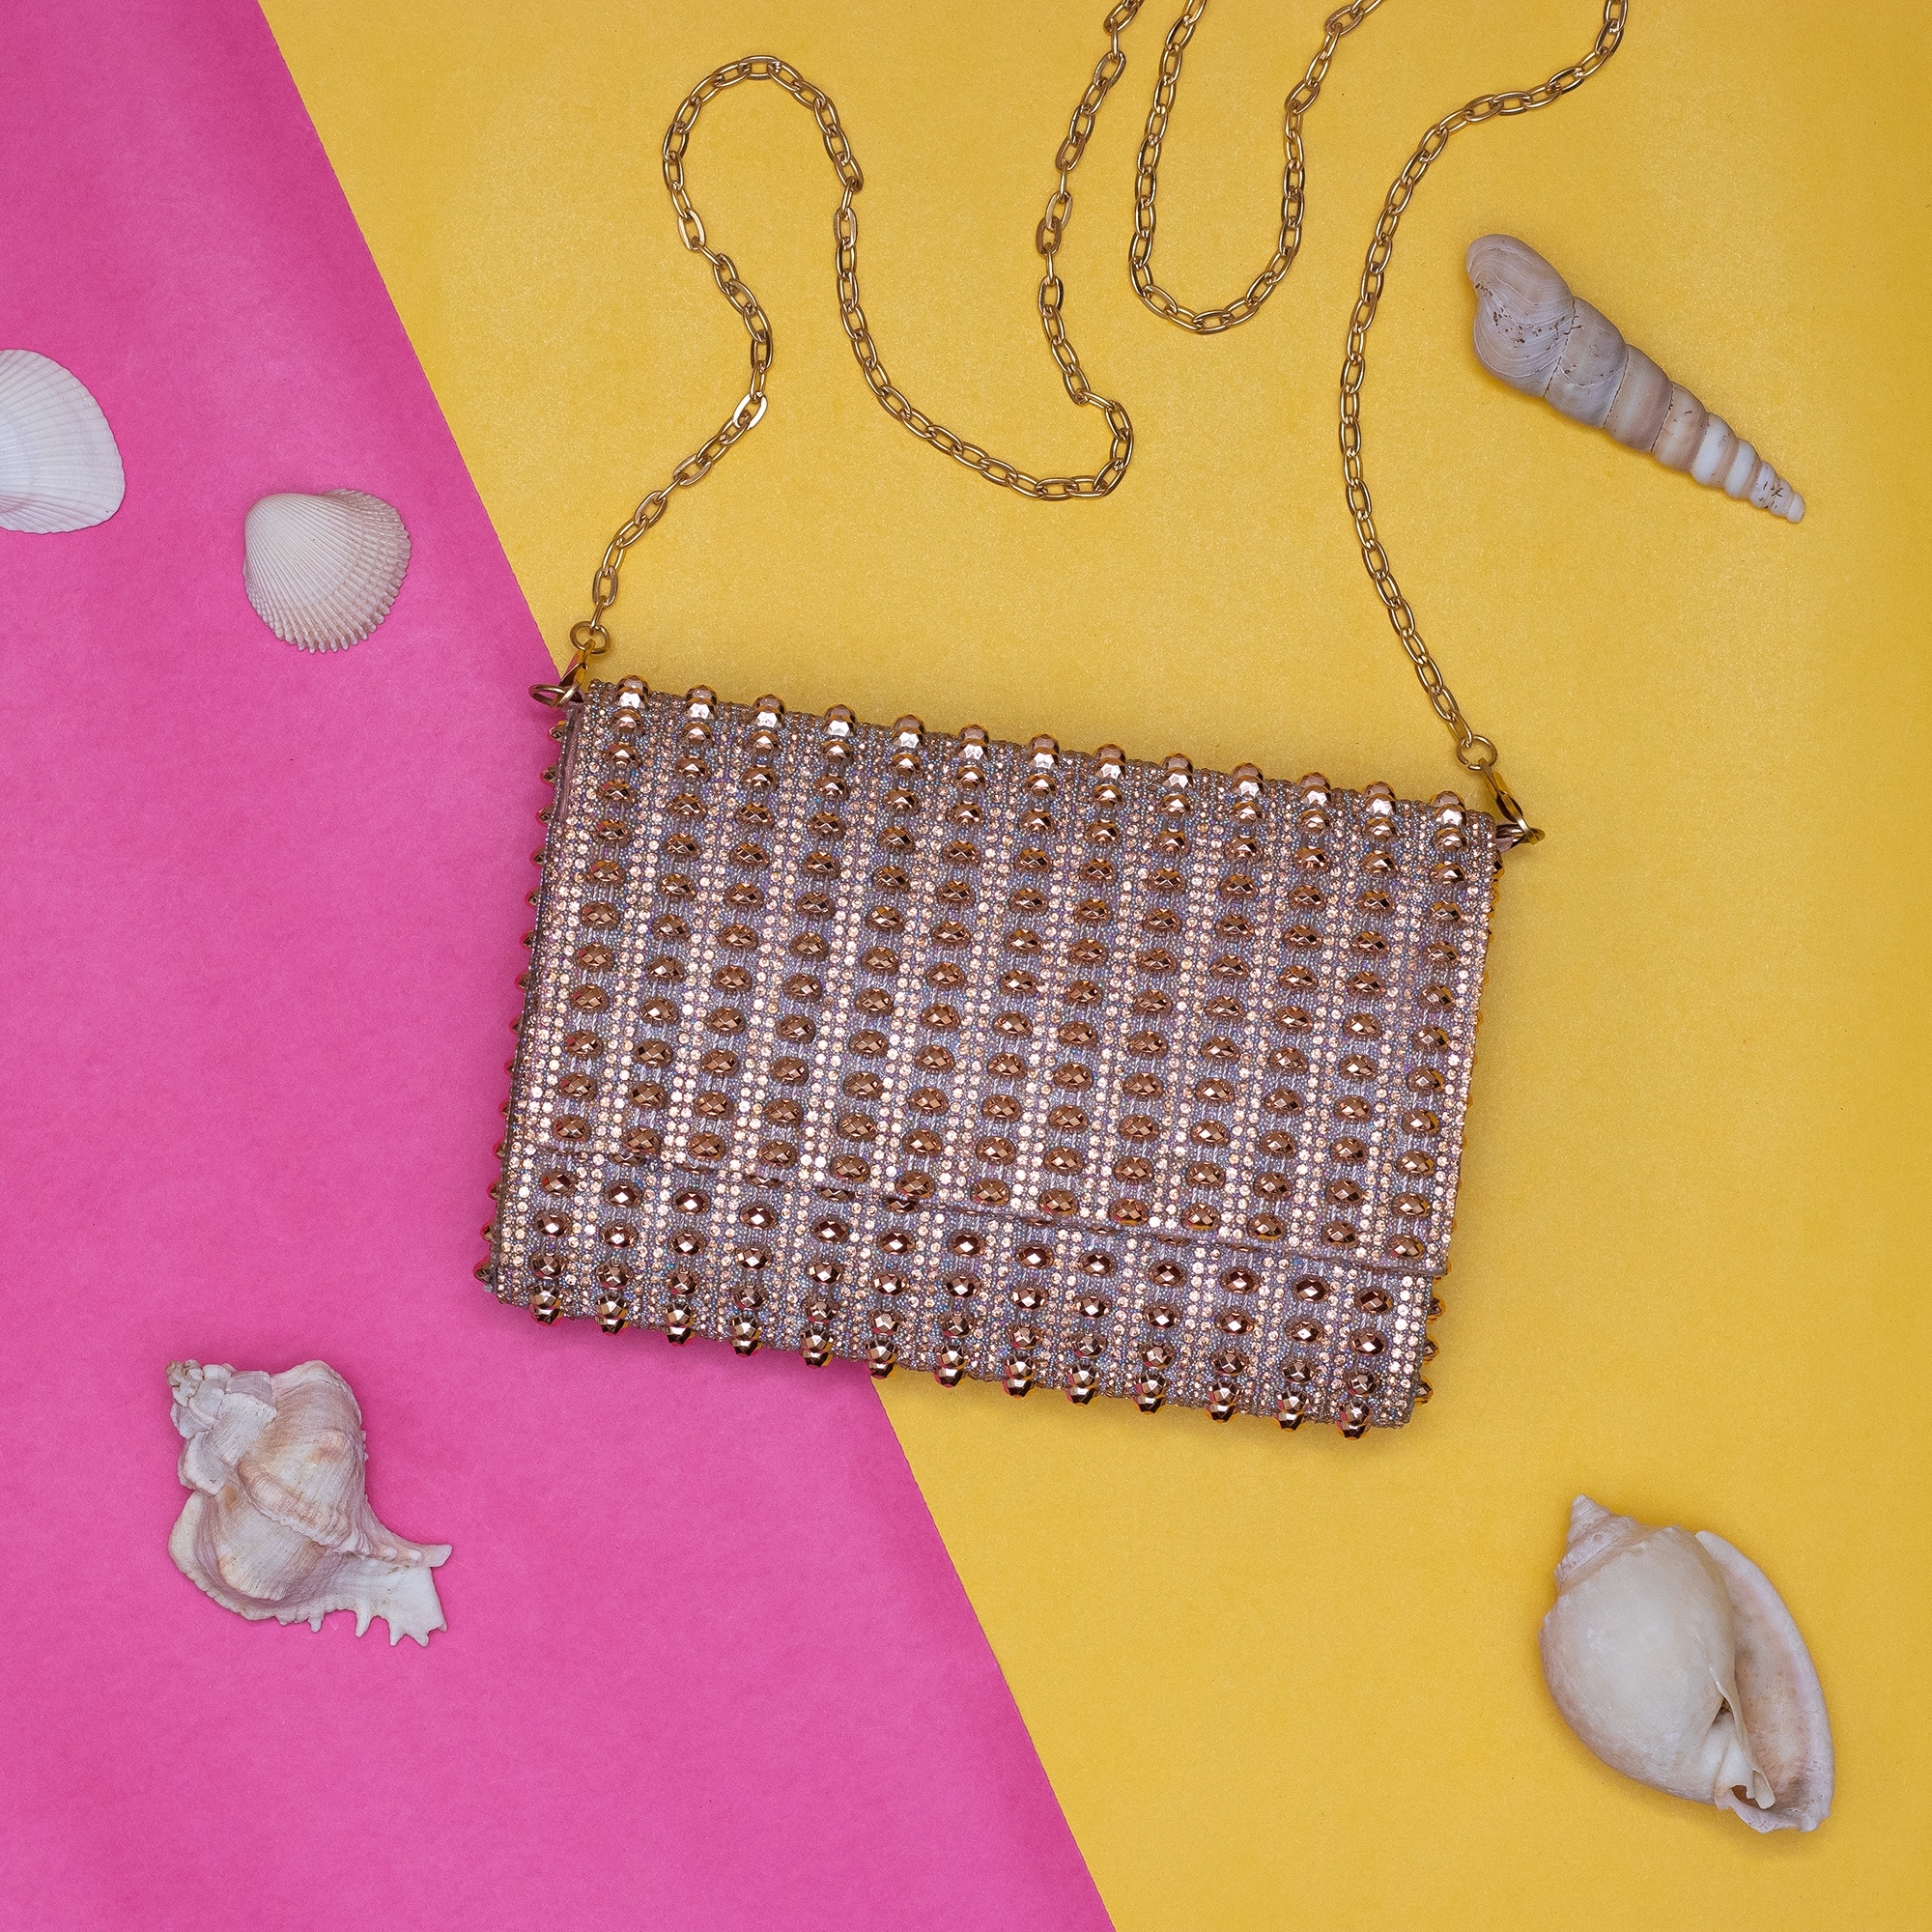 Studded copper clutch